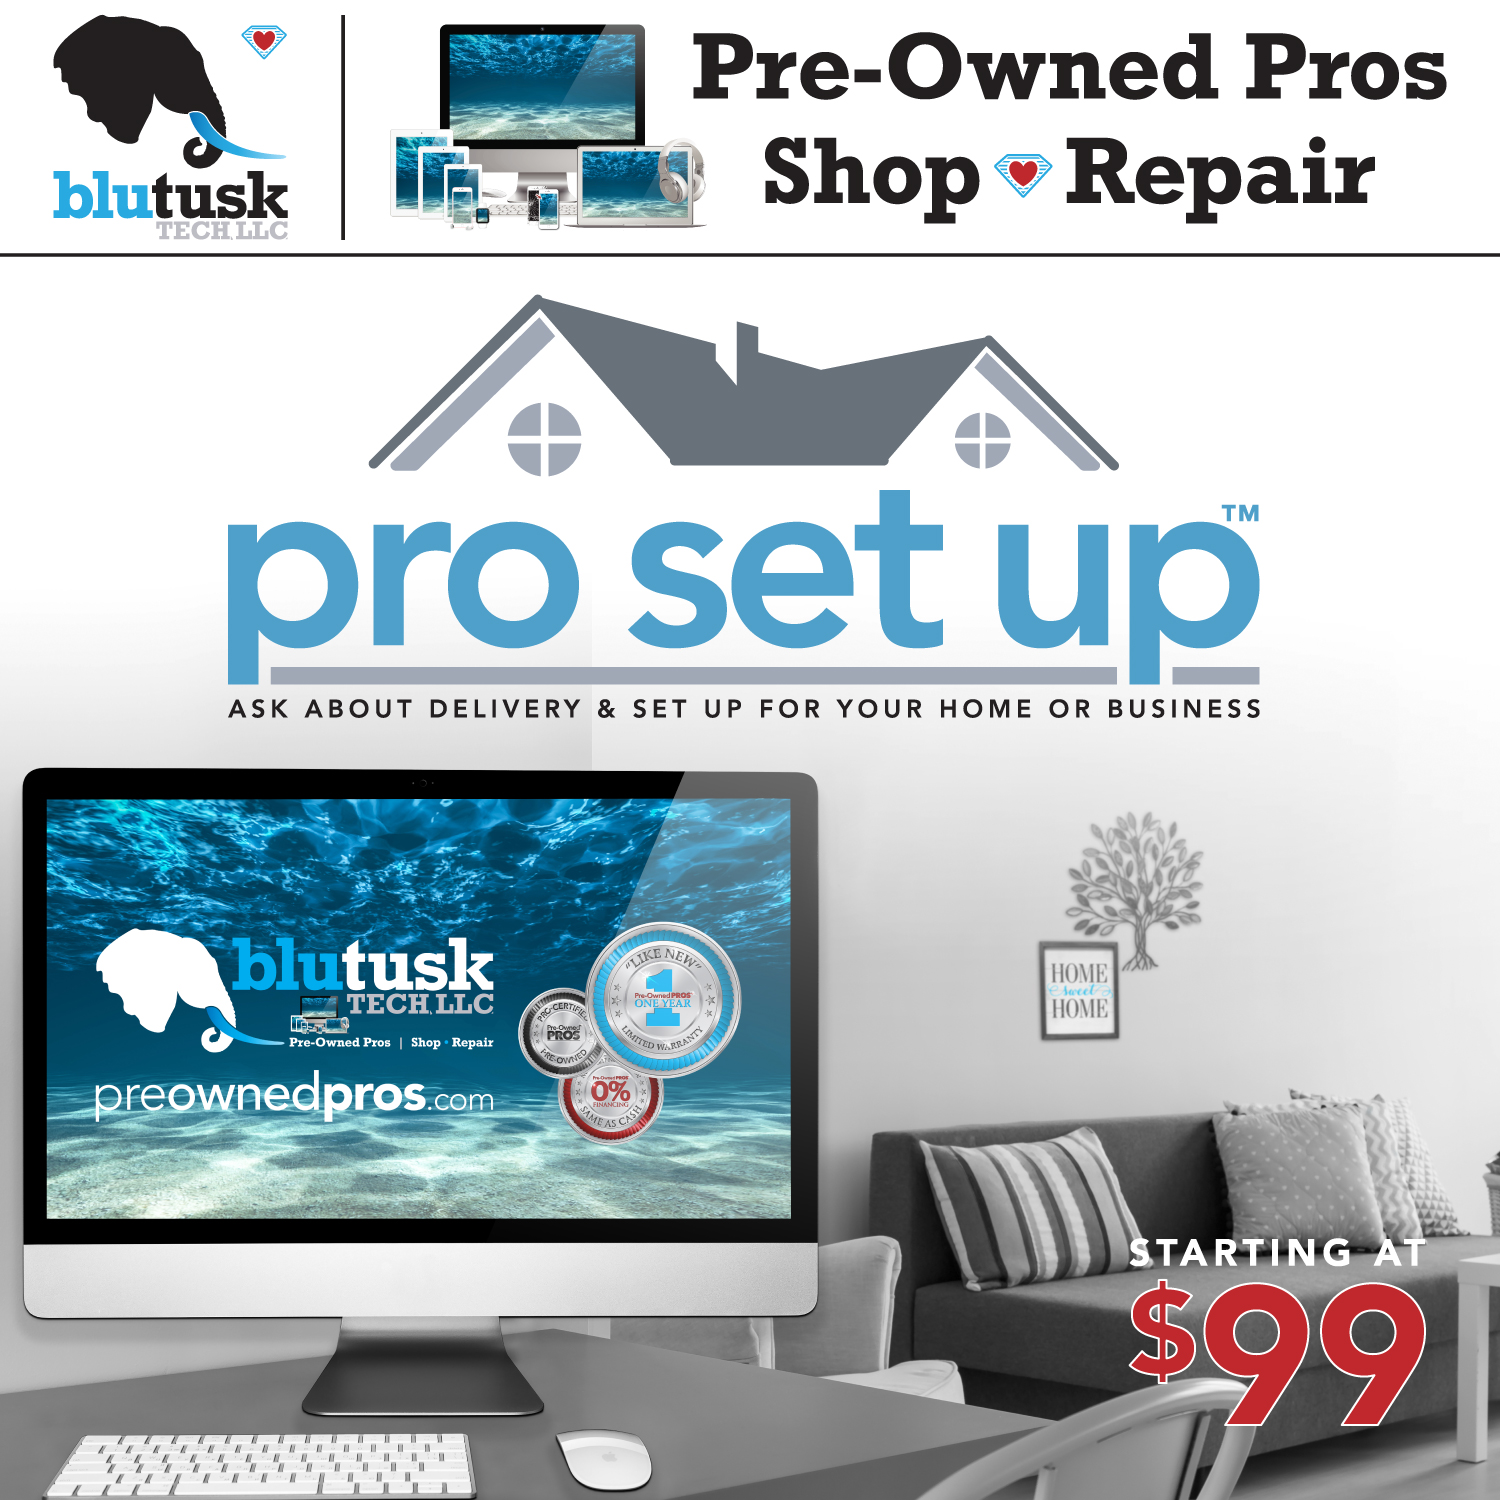 Number 4, In-Store Pro Support, from the top 10 reasons to shop with The Pre-Owned Pros at Blutusk Tech, LLC 